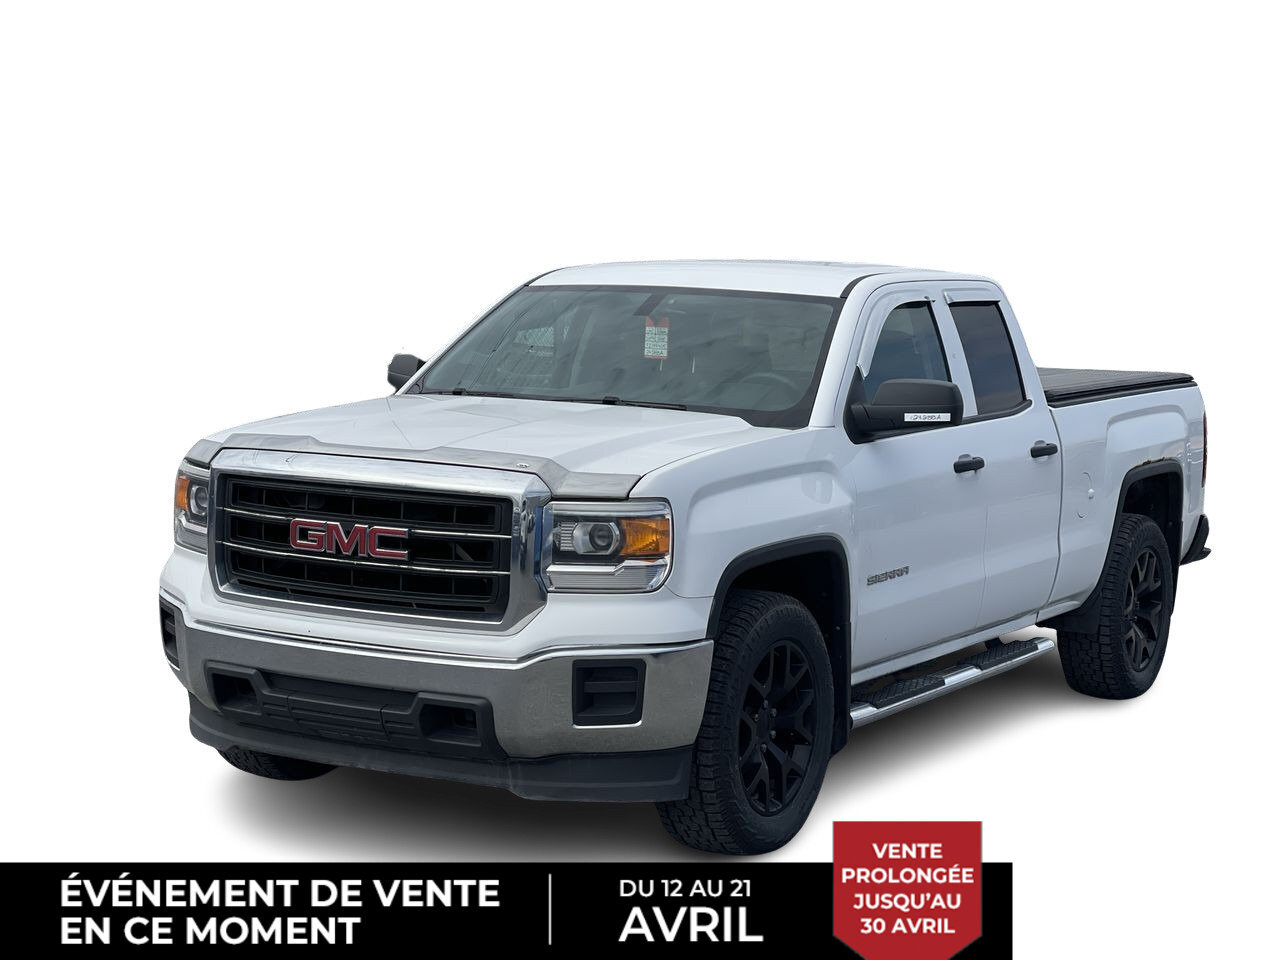 2015 GMC Sierra 1500 EXTENDED CAB AWD 4X4 / 4.3L V6 / COUVRE-CAISSE   /